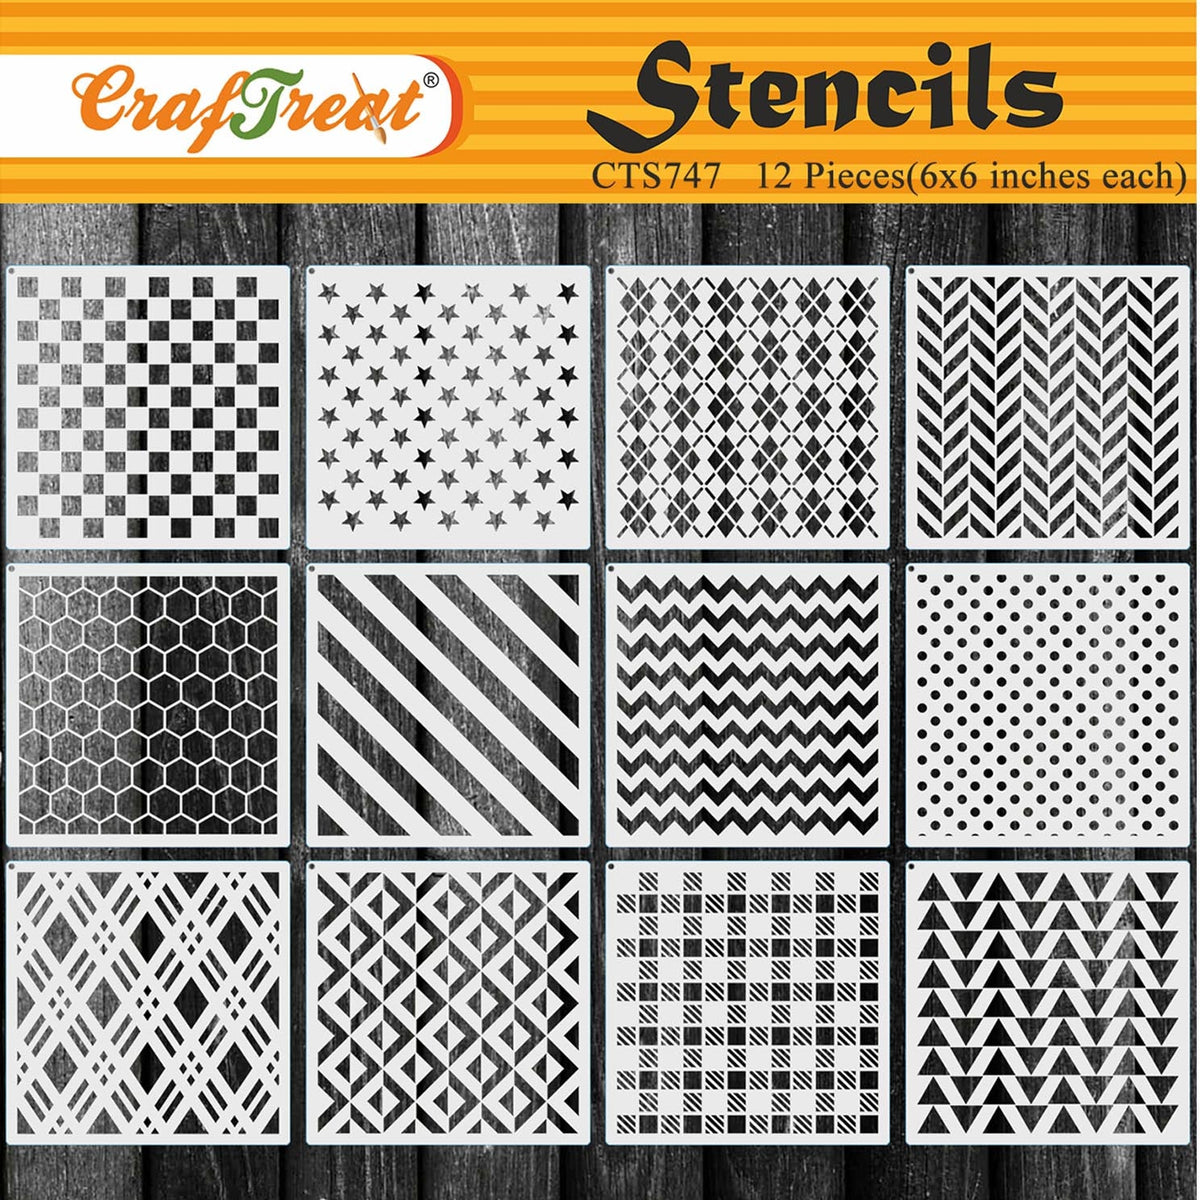 CrafTreat Geometric Shape Stencils for Painting on Wood, Wall, Tile, Canvas, Paper, Fabric and Floor - Frames and Masks - 6x6 inch - Reusable DIY